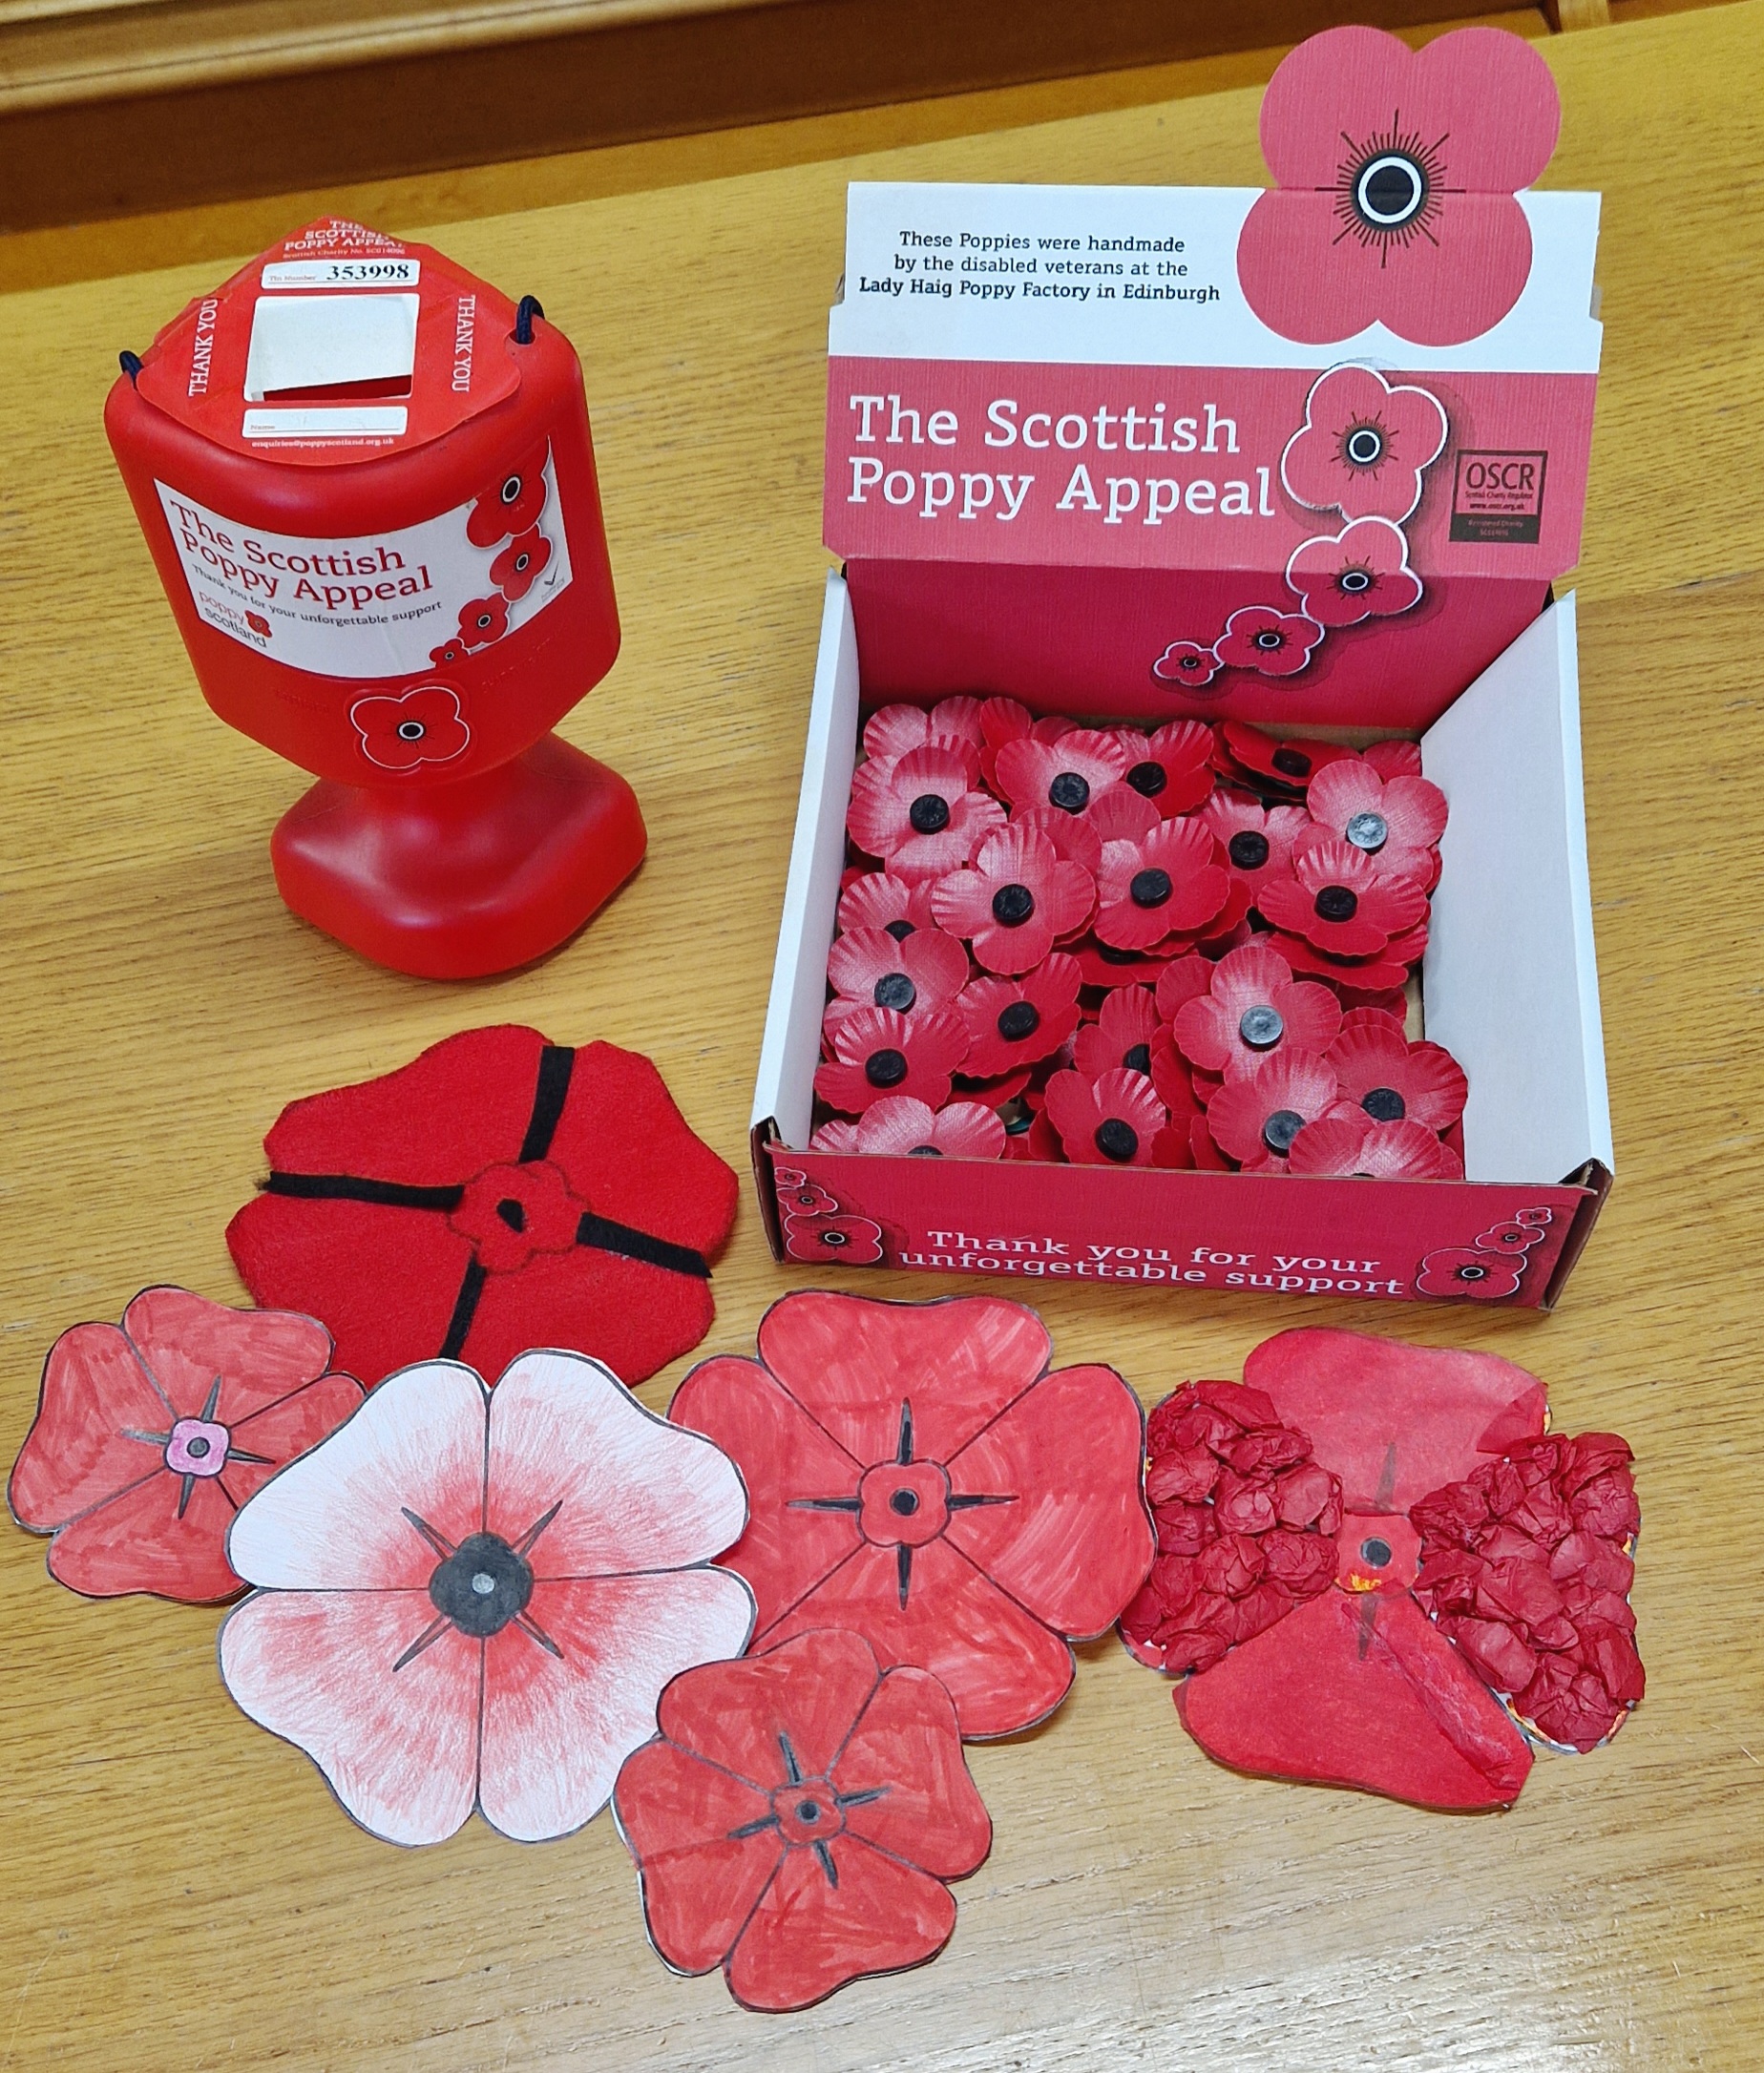 A poppy collection tin and box of poppies ready for sale